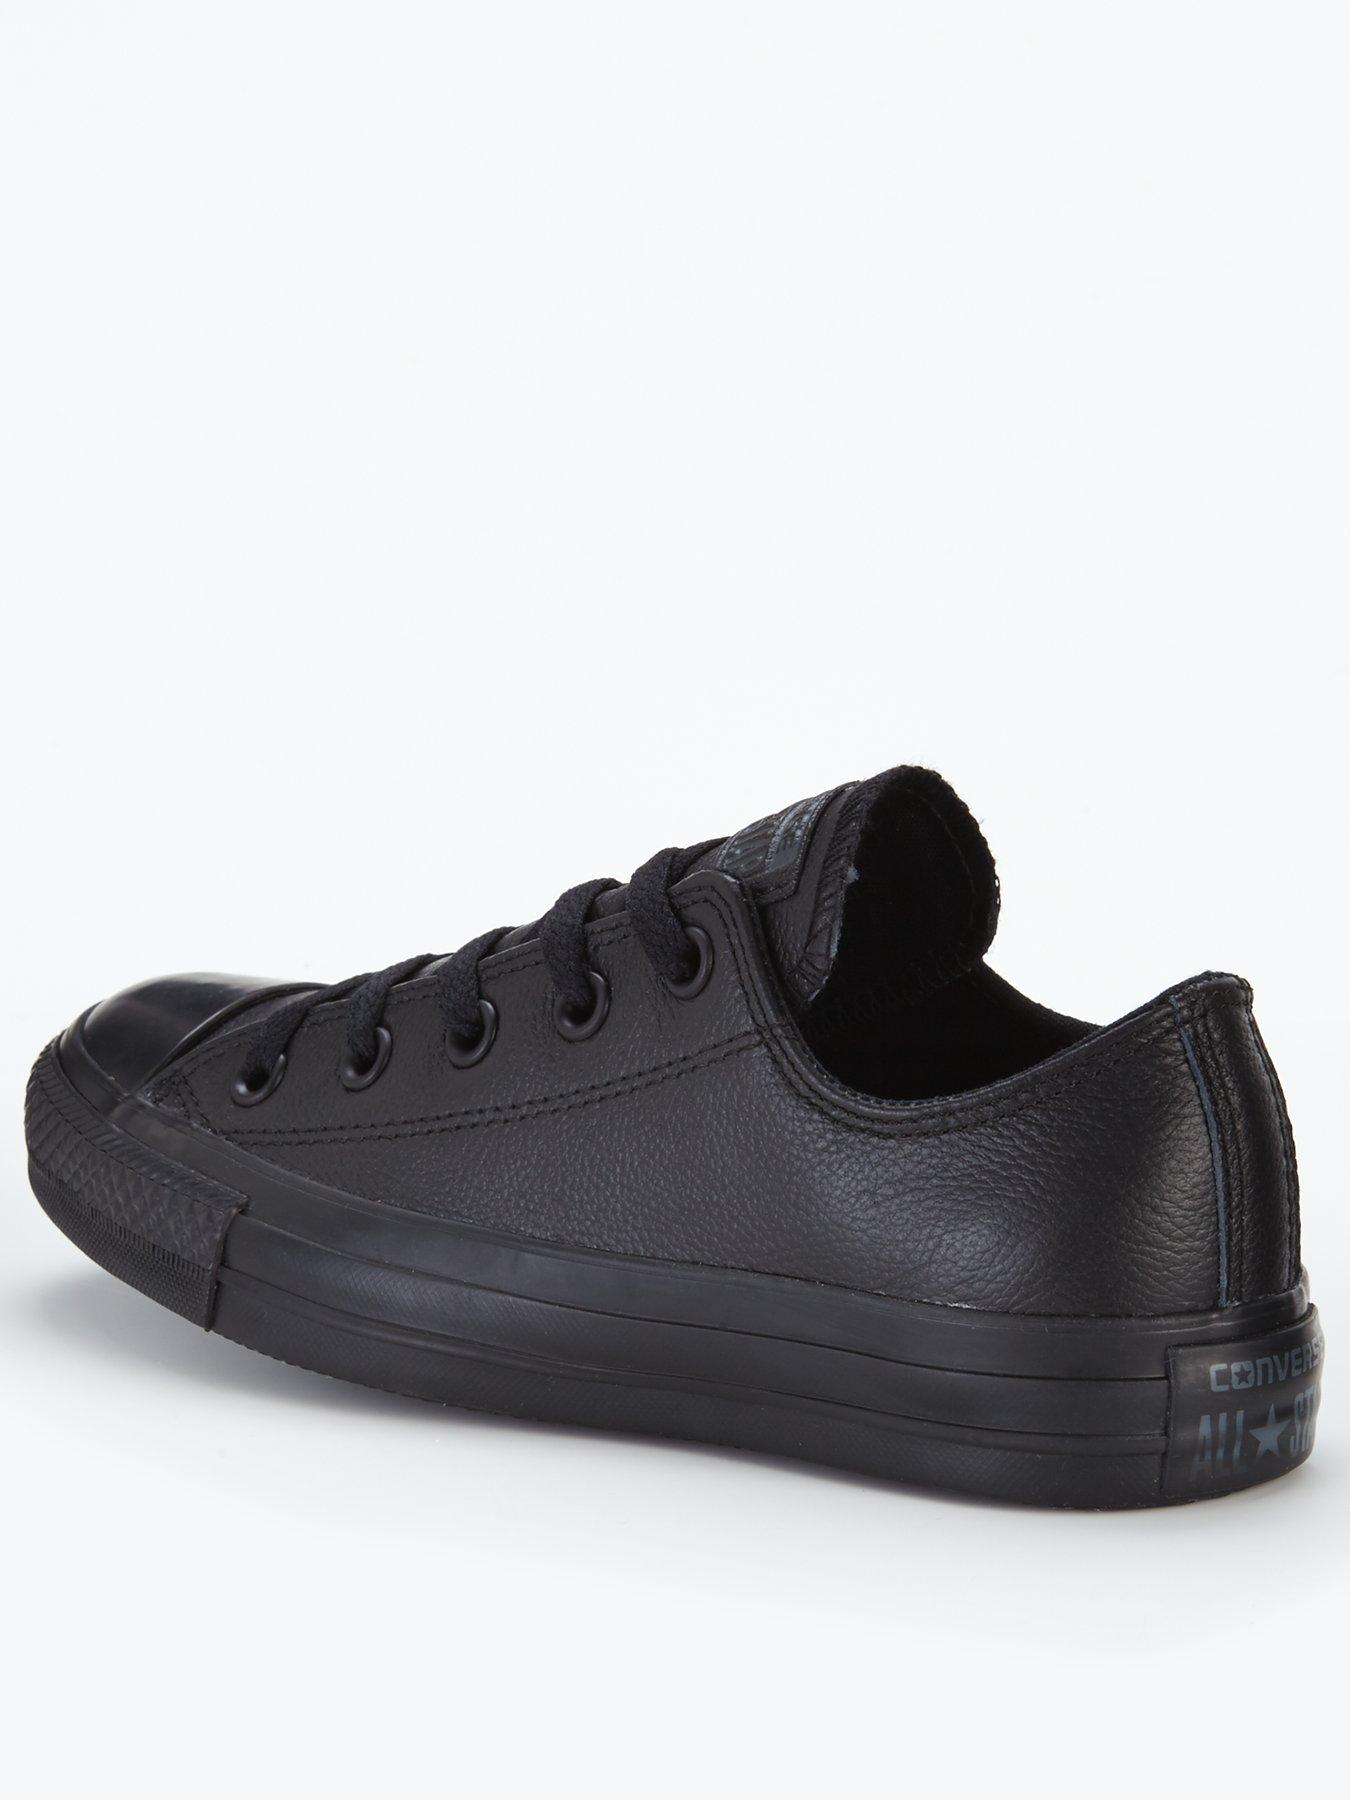 Converse Taylor All Star Leather - Black | Ireland